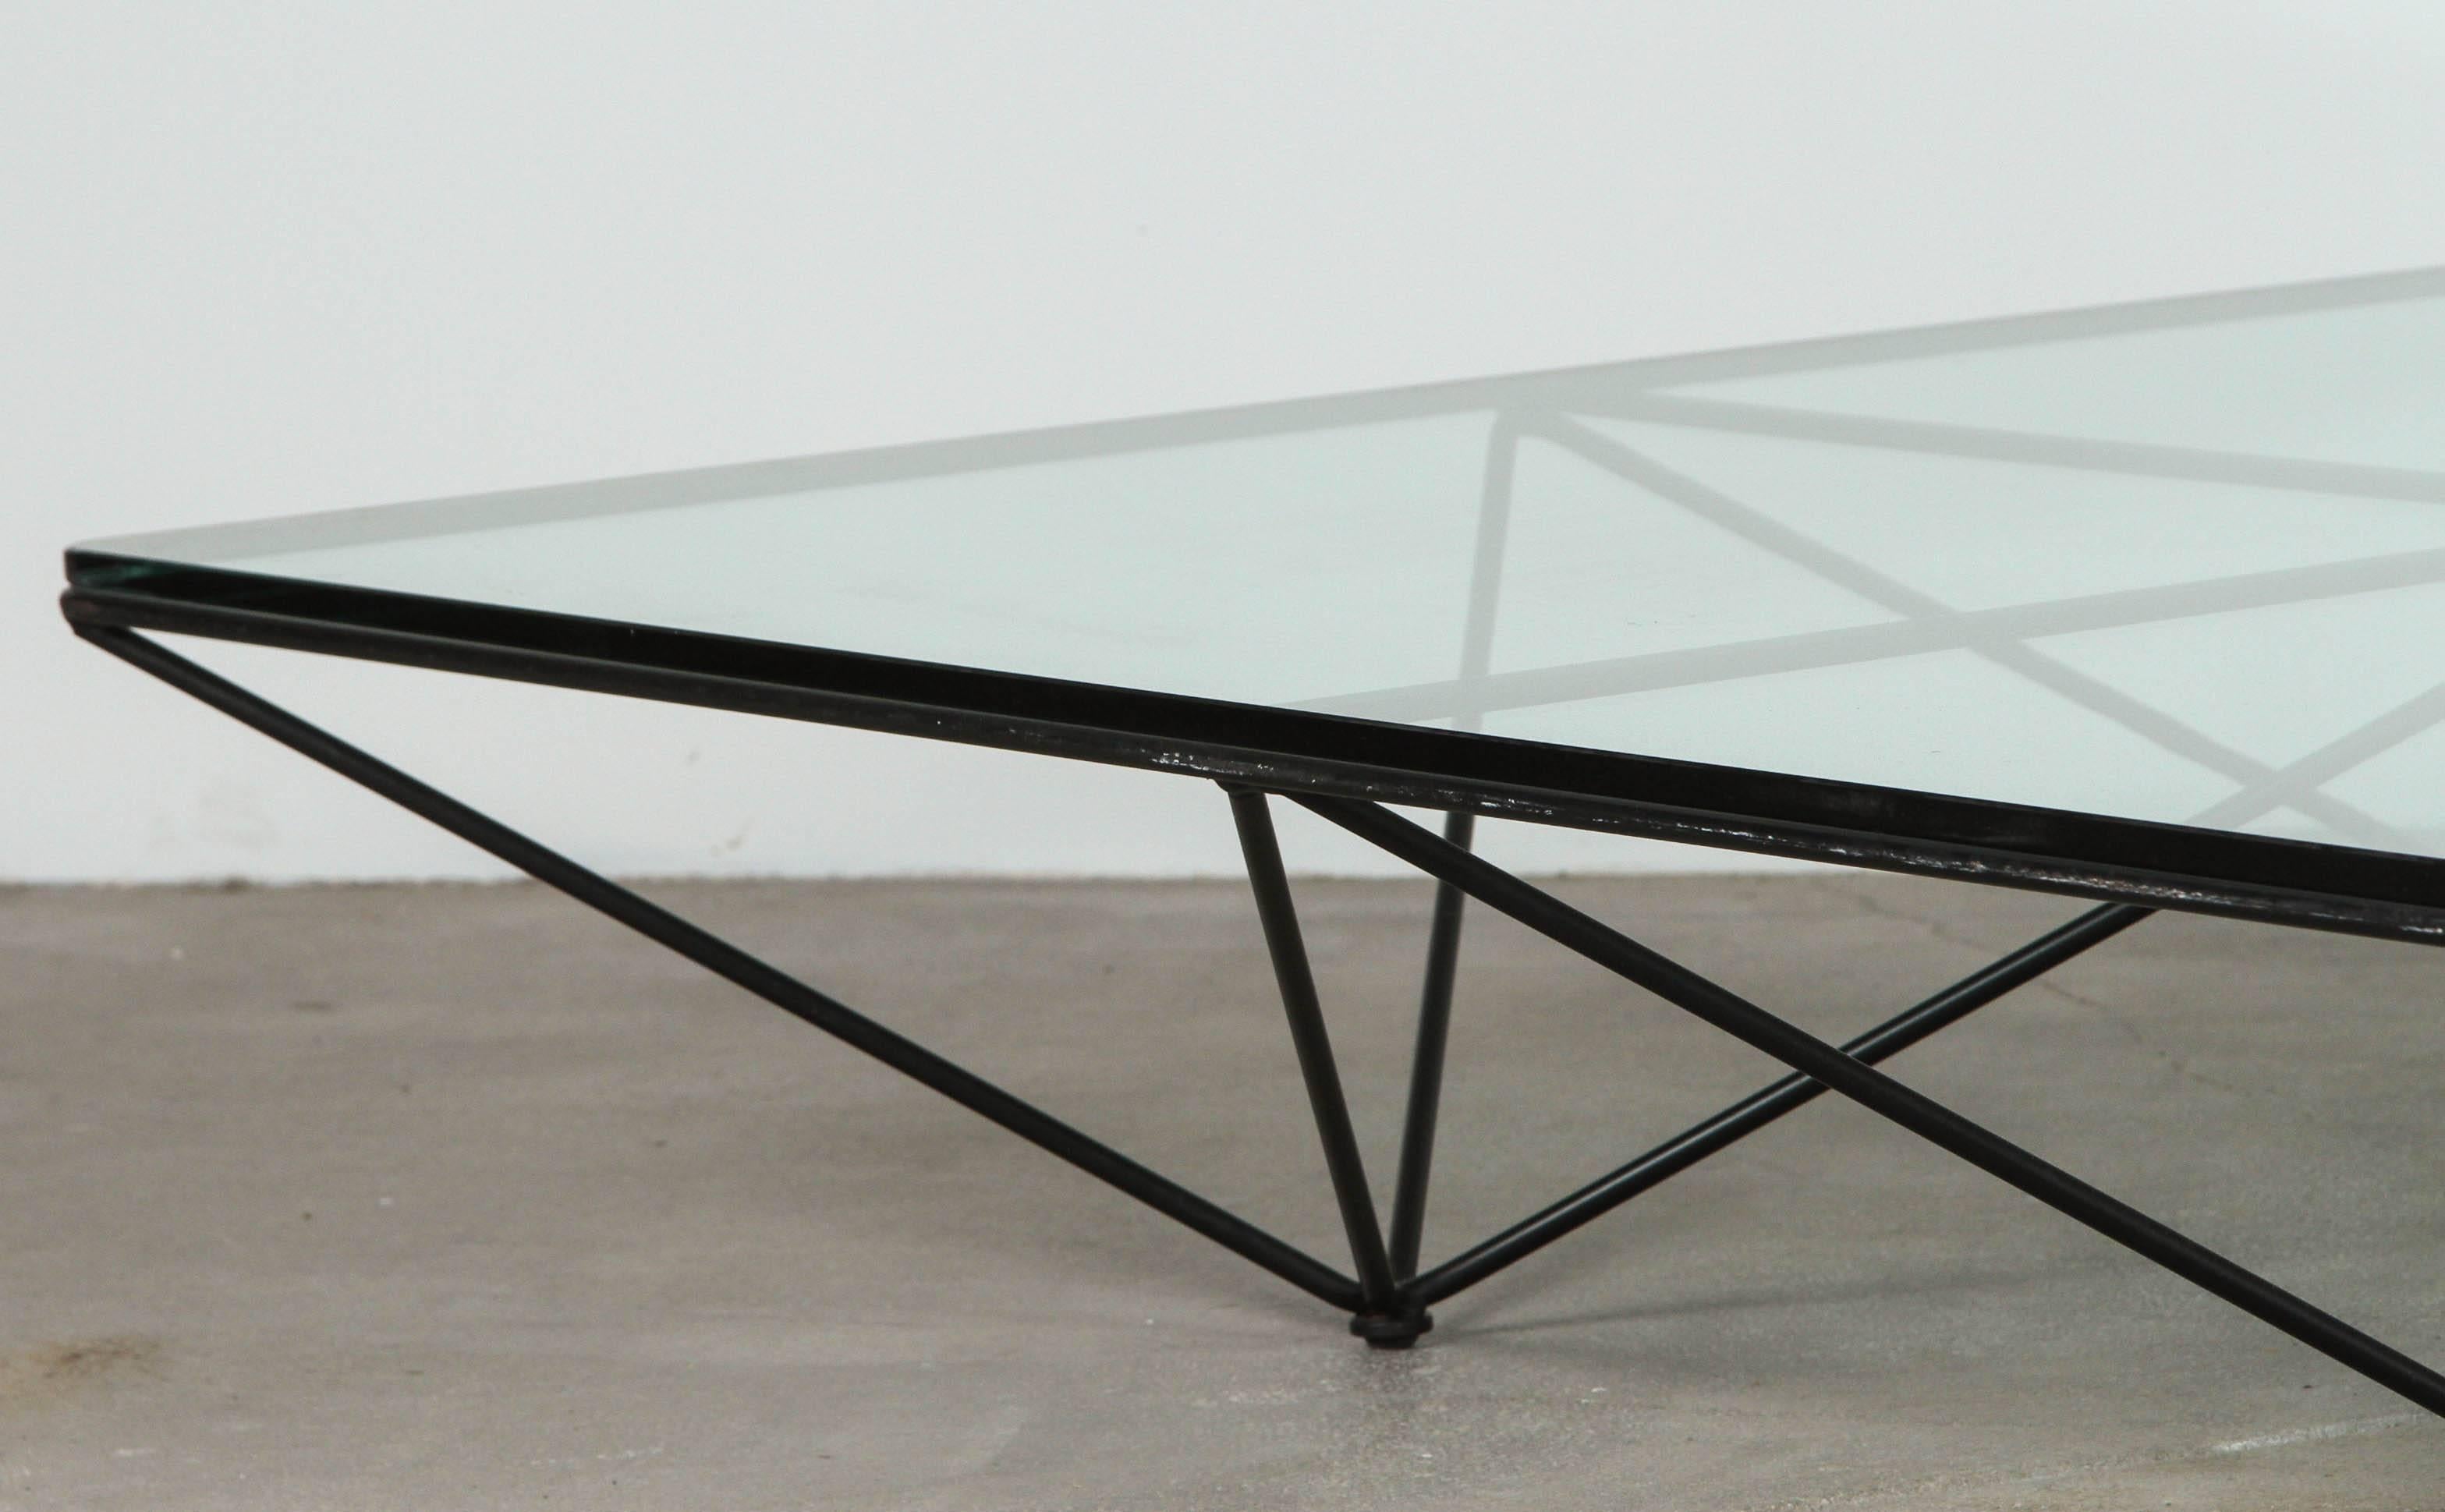 20th Century Italian Metal and Glass Coffee Table by Paolo Piva for B&B, Italia